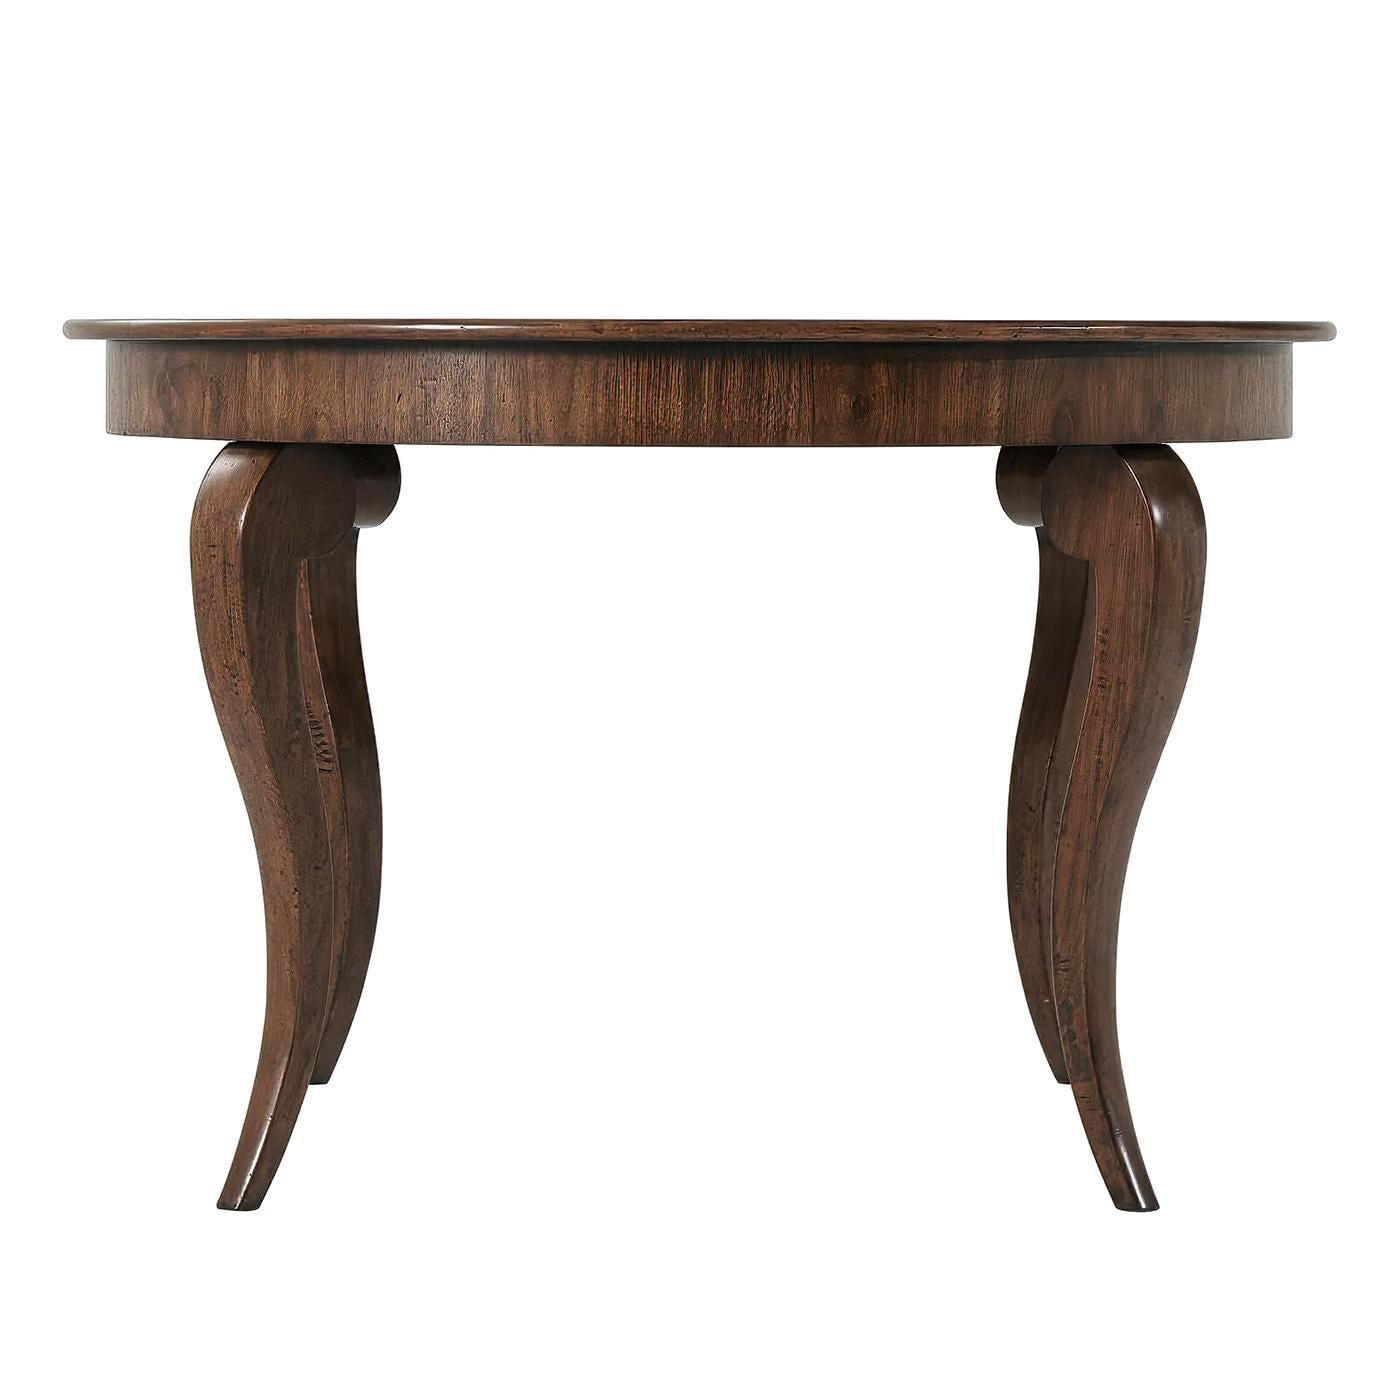 Italian style circular center table with a distressed finish and a sunburst walnut veneered top with a central burl inlay and with ebonized stringing on scroll form saber legs.
Dimensions: 46